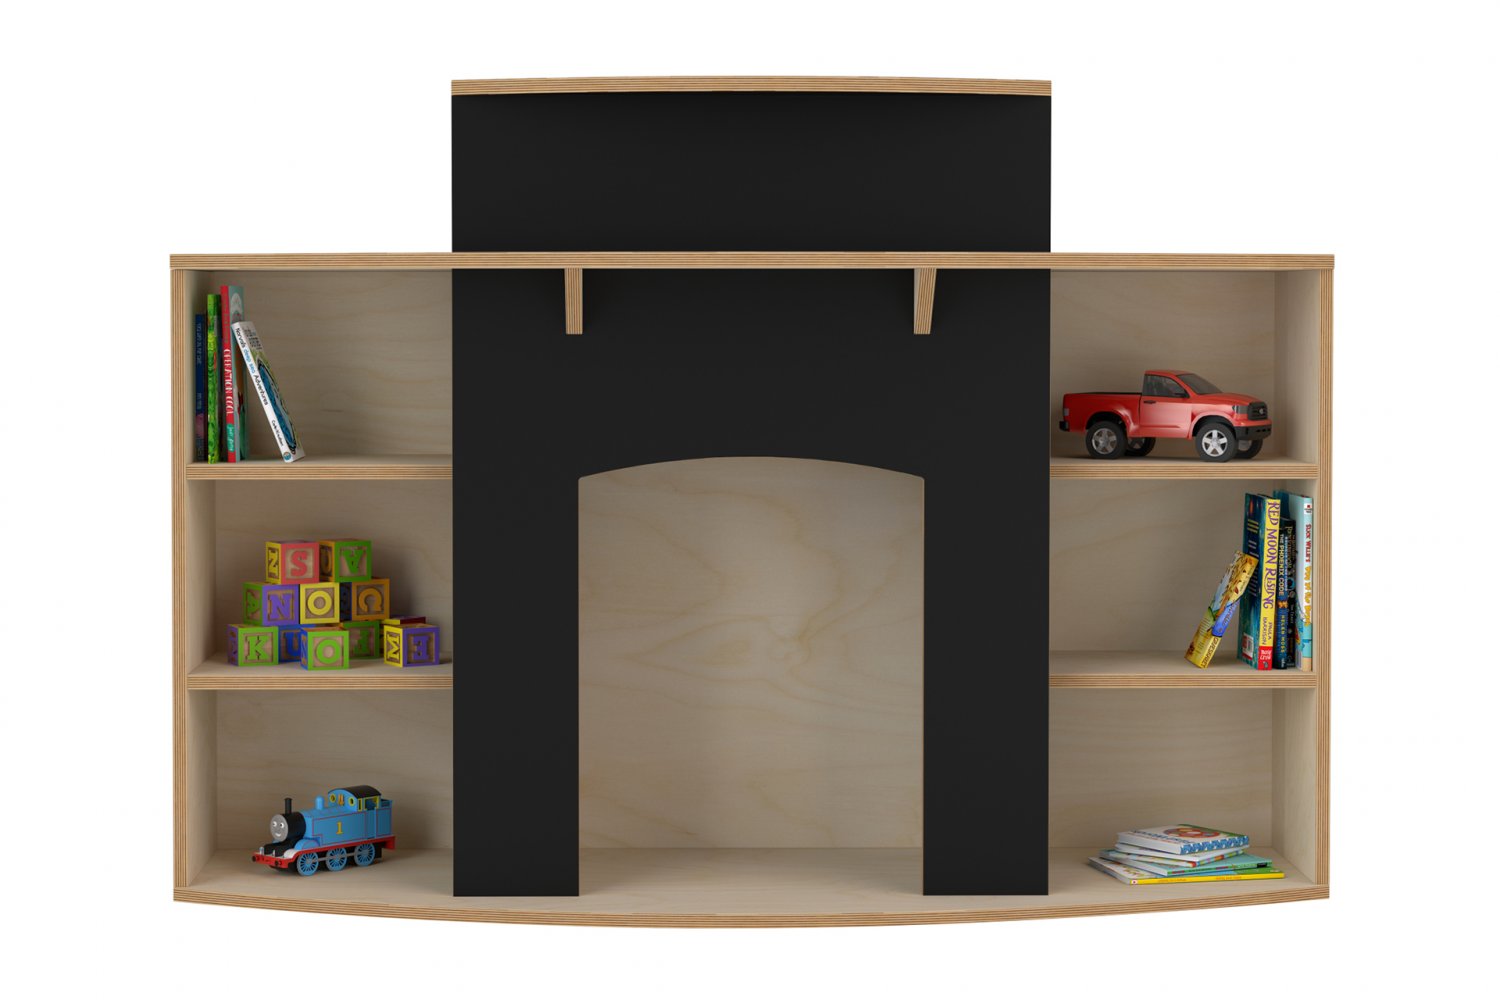 Wooden Fire place for Early Learning